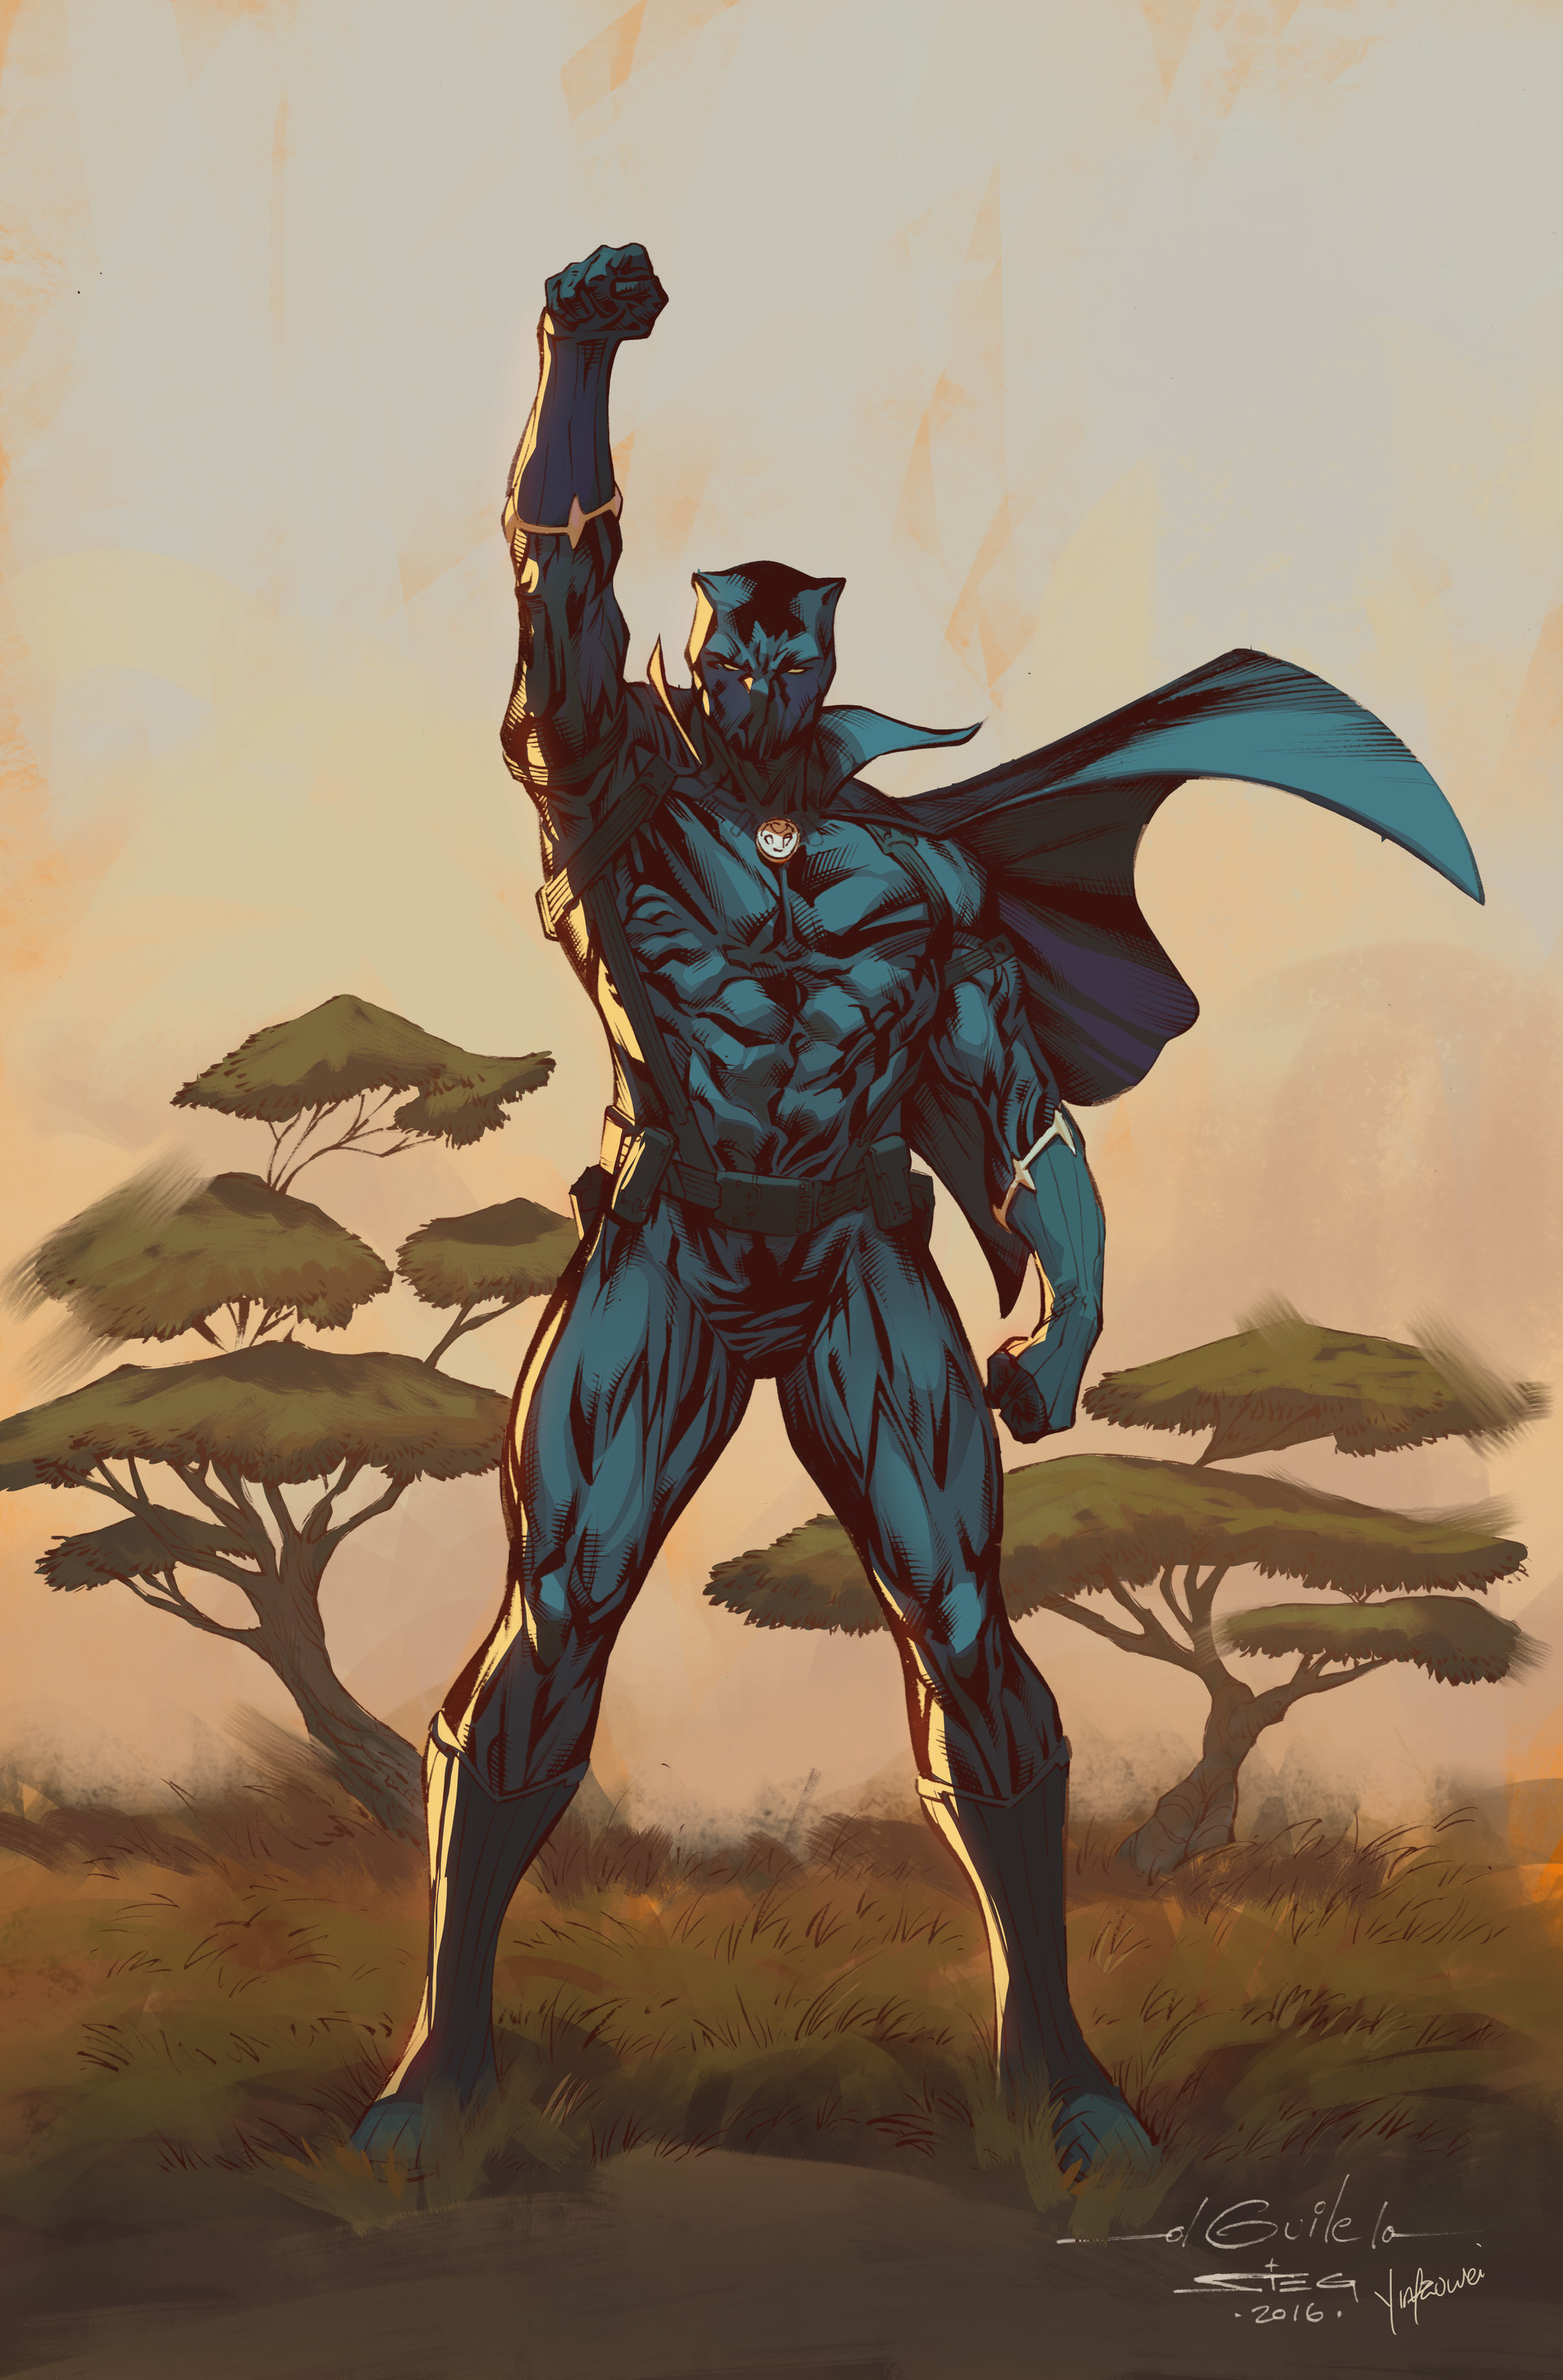 harrison-yinfaowei-black-panther-conqueror-mark-stegbauer-yinfaowei-colors.jpg